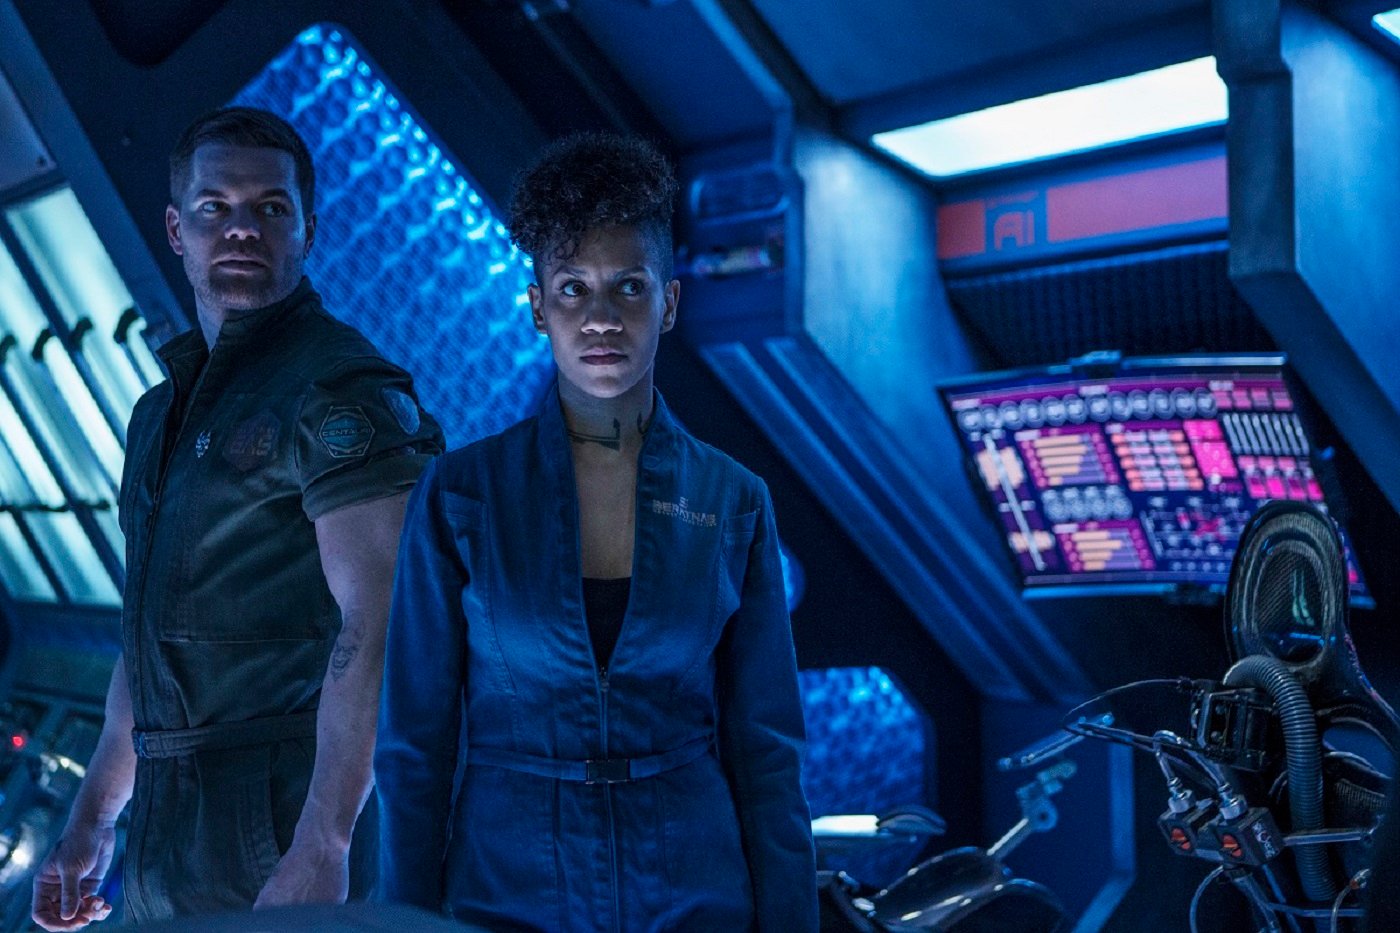 'The Expanse' stars Wes Chatham as Amos Burton and Dominique Tipper as Naomi Nagata -9 Amos wears a green jumpsuit, Naomi a blue one. They are aboard the Rocinante, looking serious, 